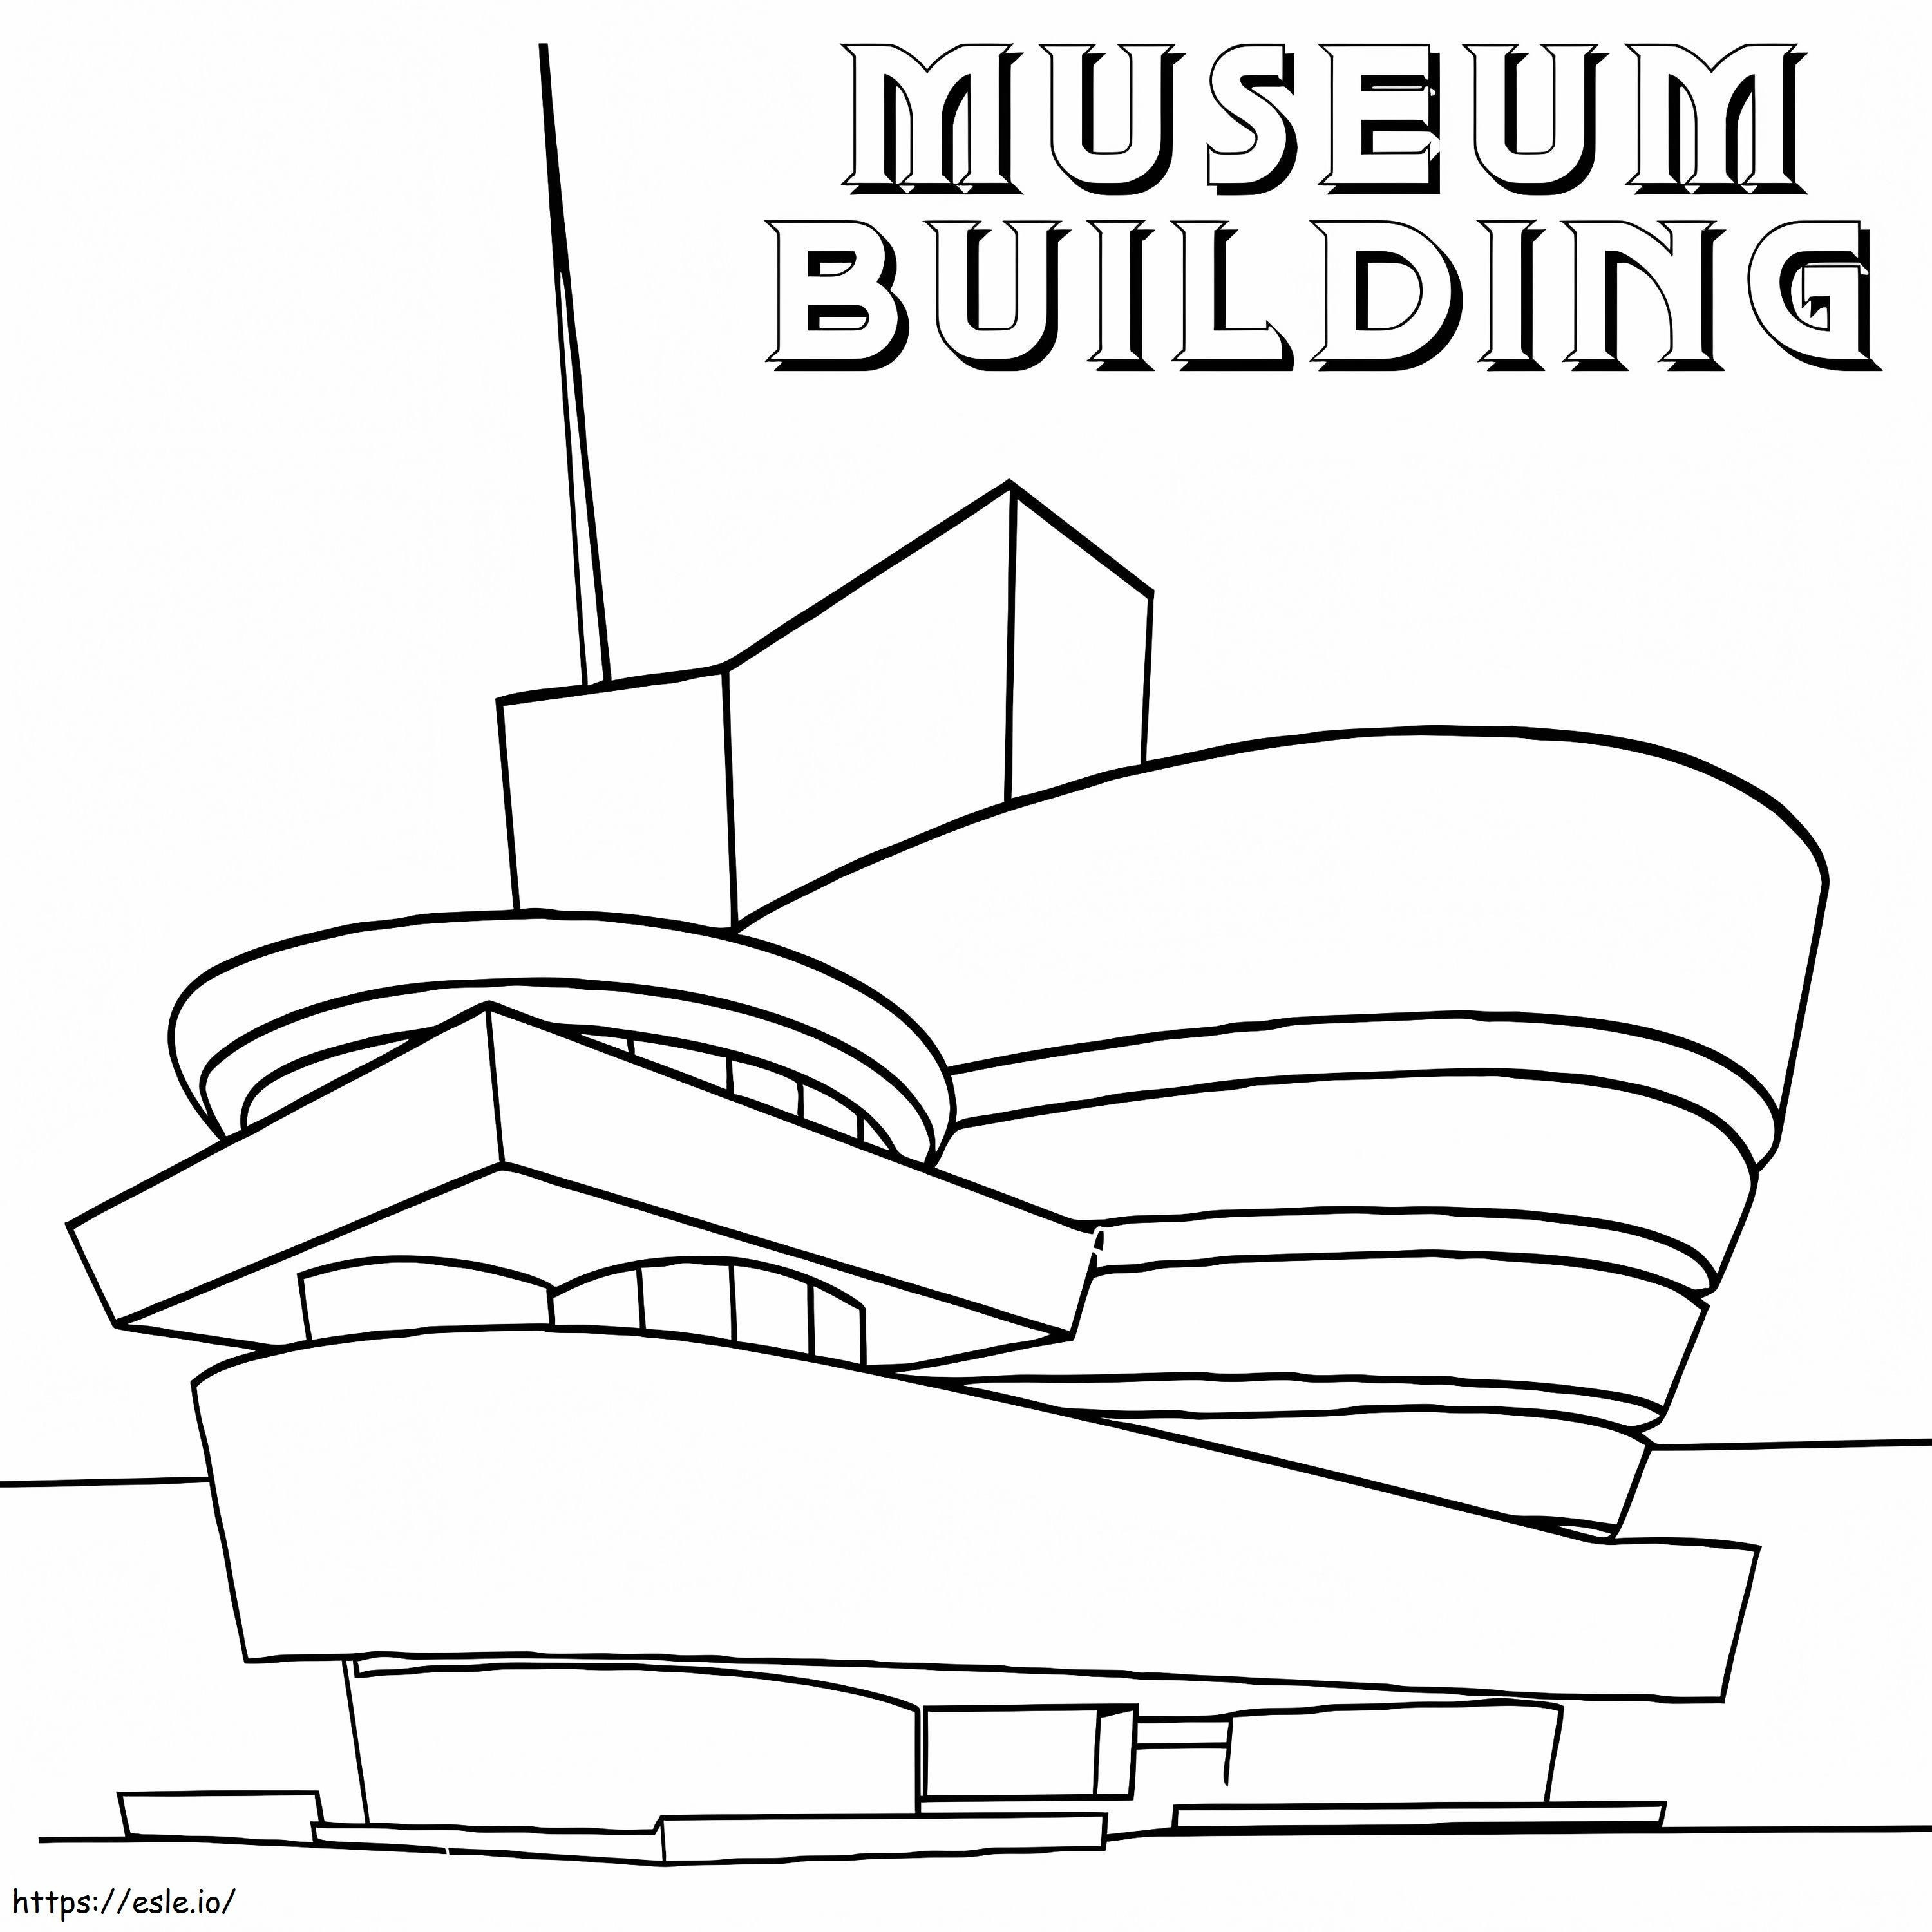 Museum Building coloring page